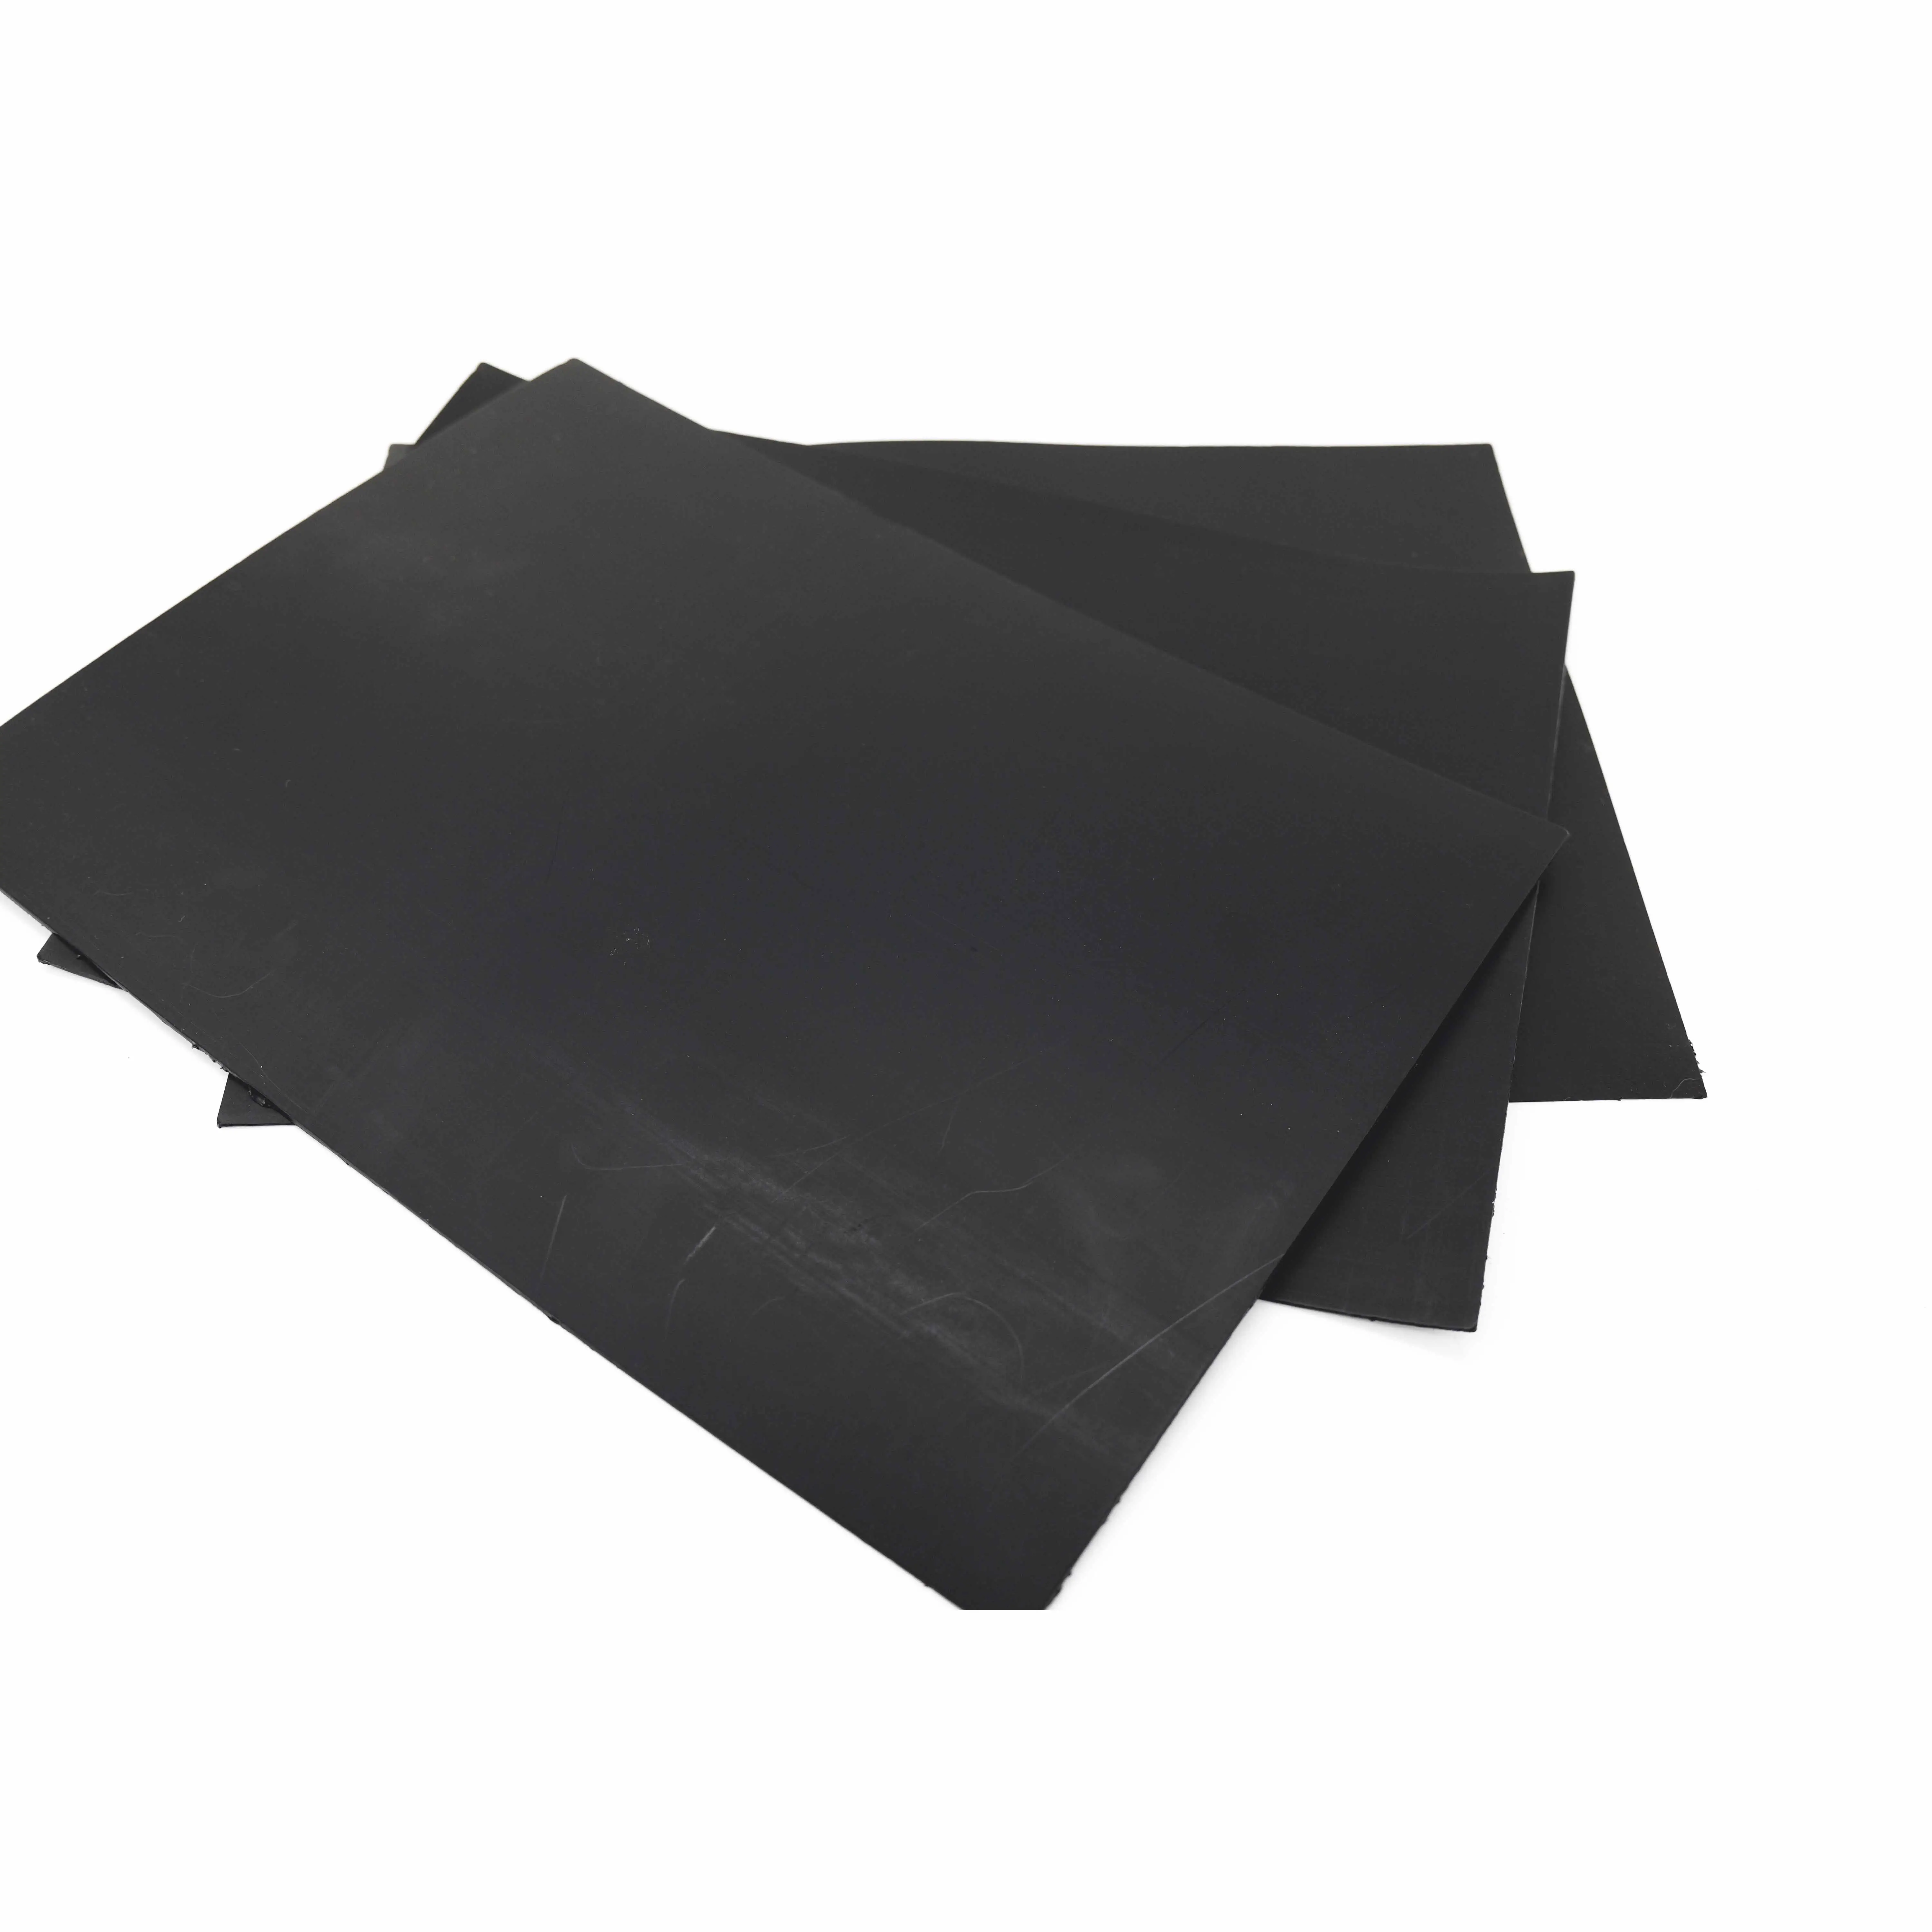 Anti-Seepage High Quality Waterproof Plastic Pond Liner HDPE Factory Geomembrane Liner